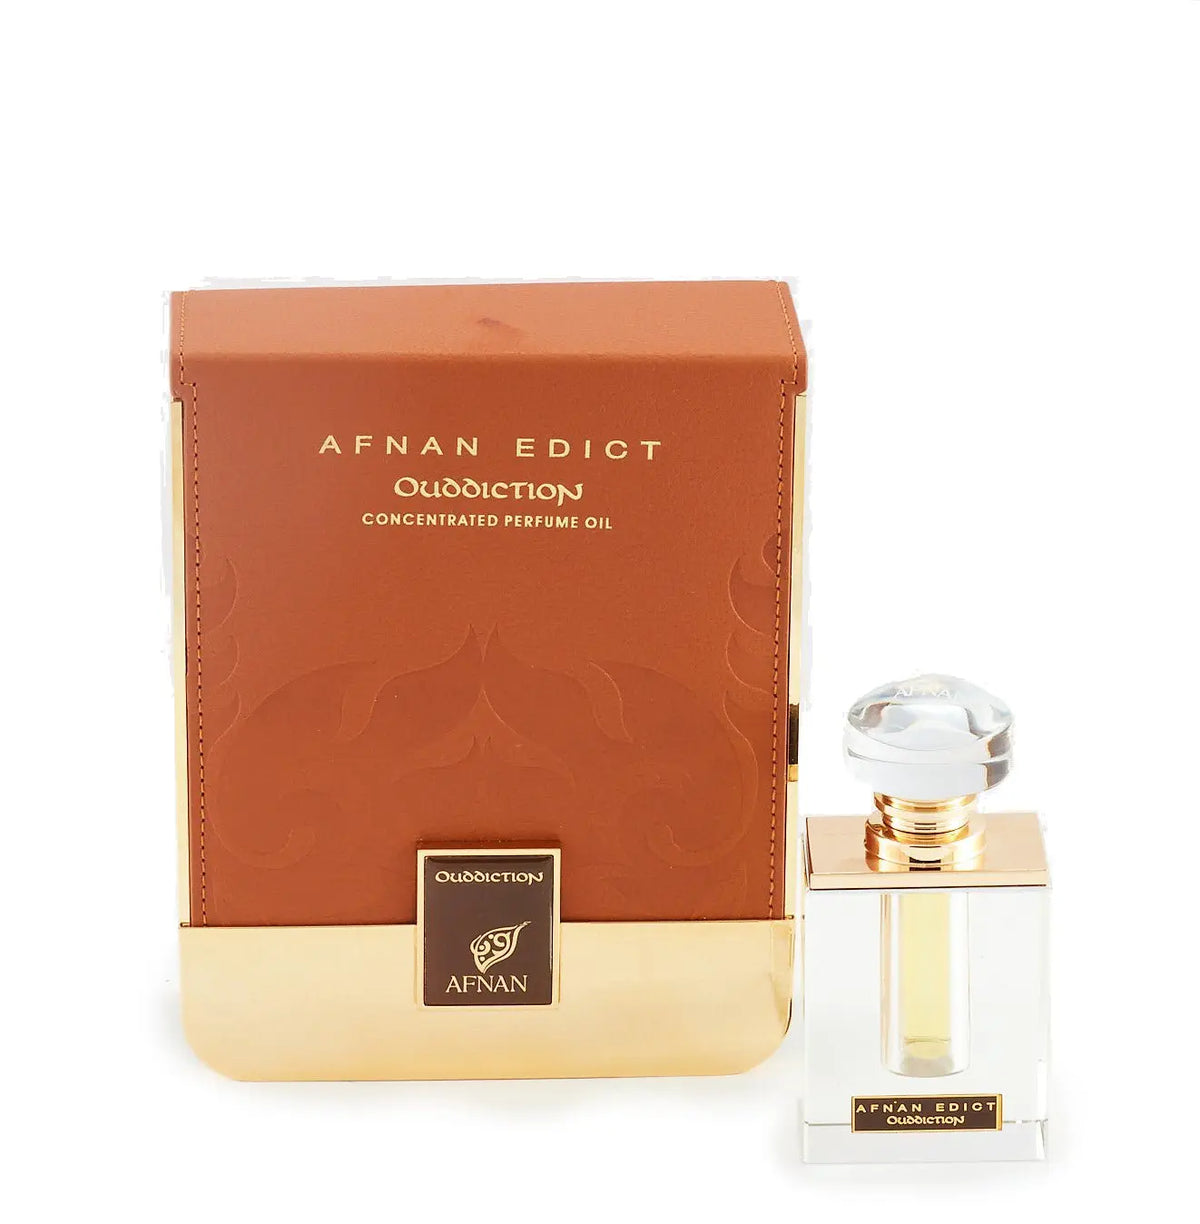 The image shows a perfume product consisting of a rectangular glass bottle and its packaging. The bottle, placed to the right, has a clear liquid with a golden neck and a large, transparent, faceted cap. On its front, there's a label with "AFNAN EDICT Ouddiction" in black letters on a gold background. To the left is the box, in a gradient of brown to gold with a subtle paisley design, and it reads "AFNAN EDICT Ouddiction CONCENTRATED PERFUME OIL" in gold embossed letters. 